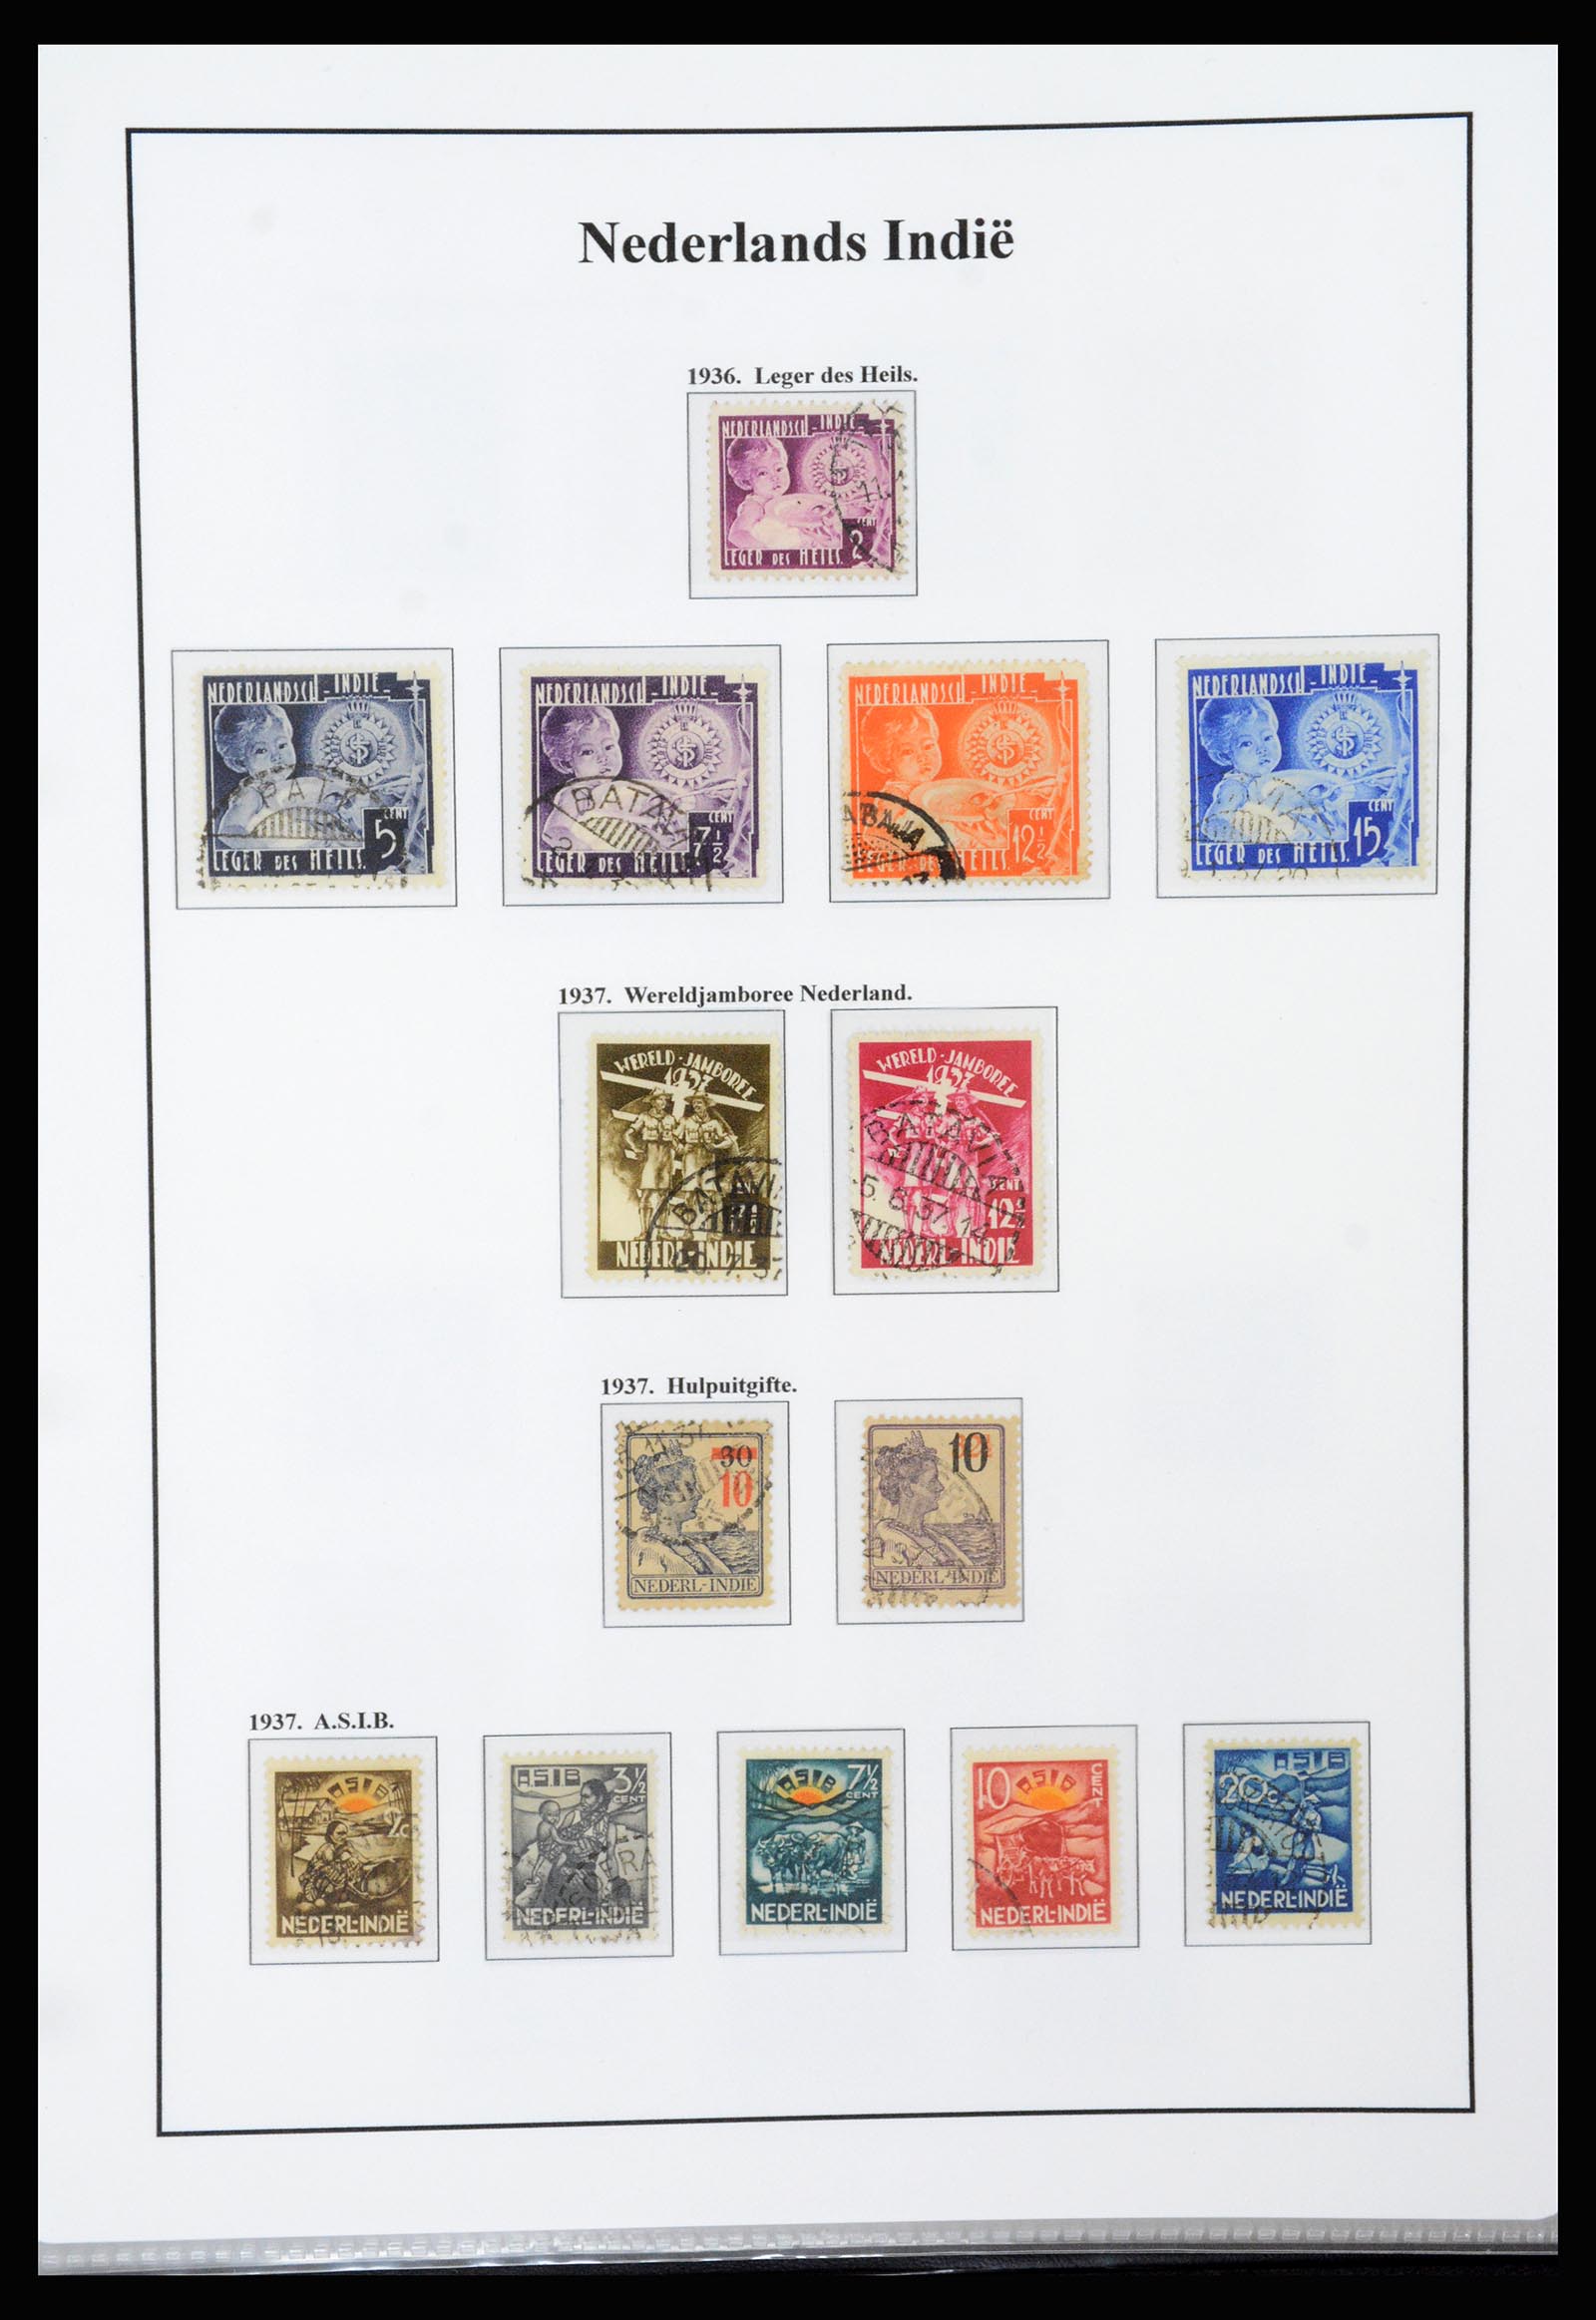 37247 019 - Stamp collection 37247 Dutch east Indies 1864-1949.